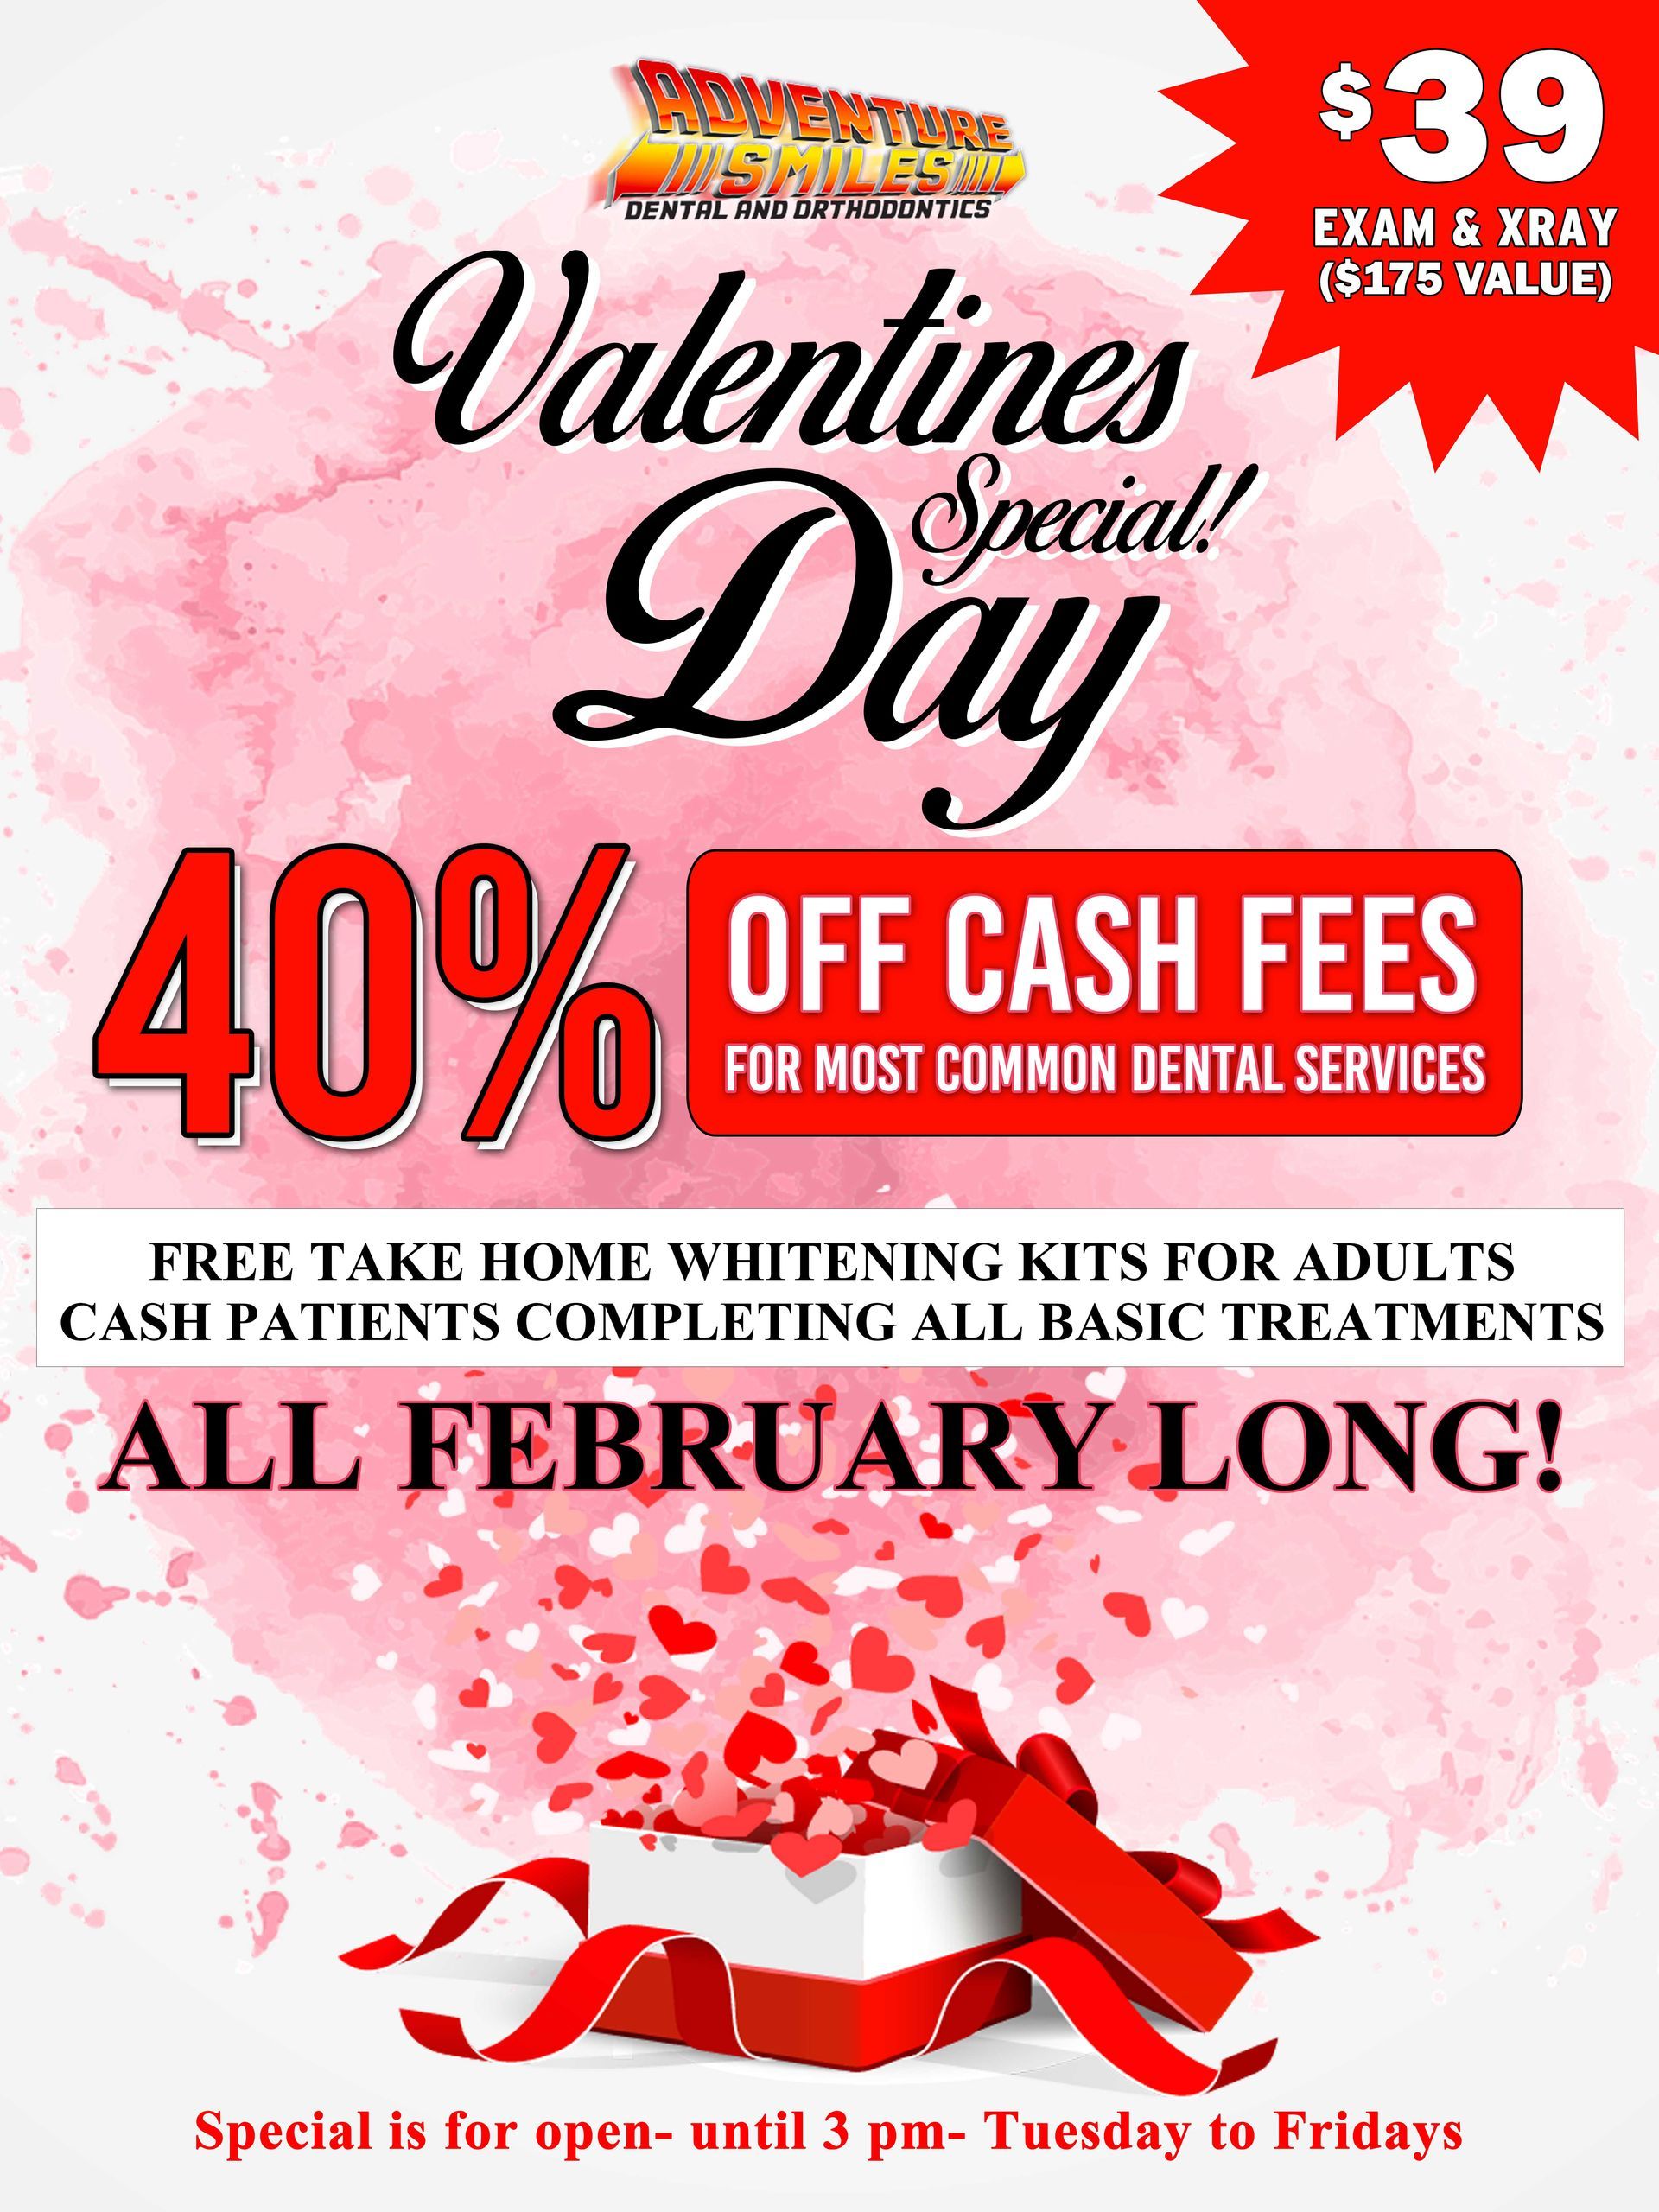 a valentine 's day special is offering a 40 % off cash fees for most common dental services .